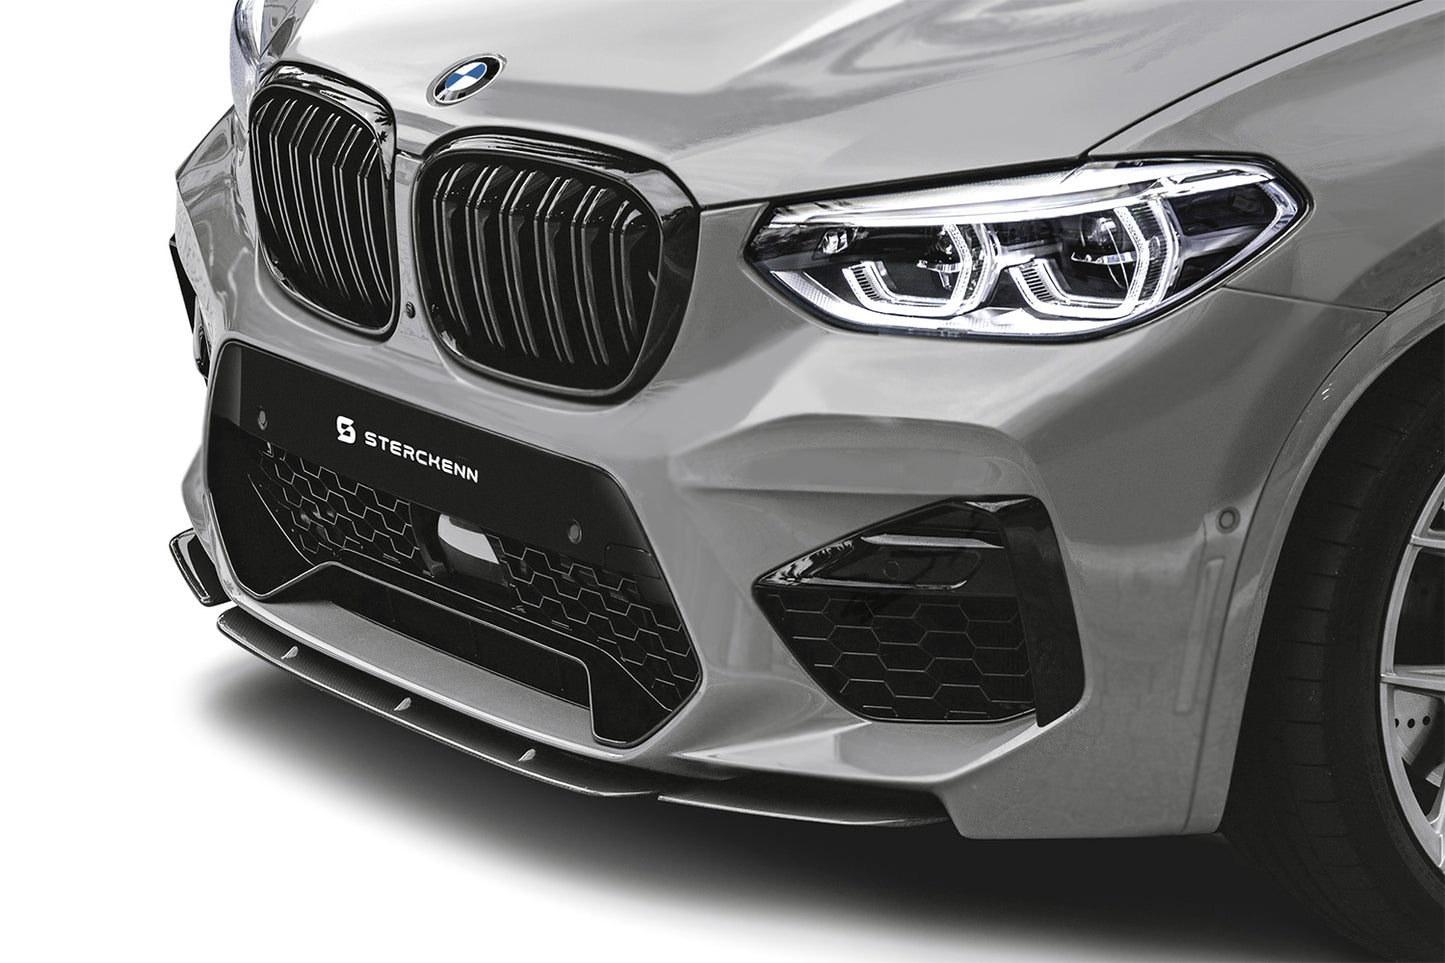 Bumper of a silver BMW X3M (F97) on a white background